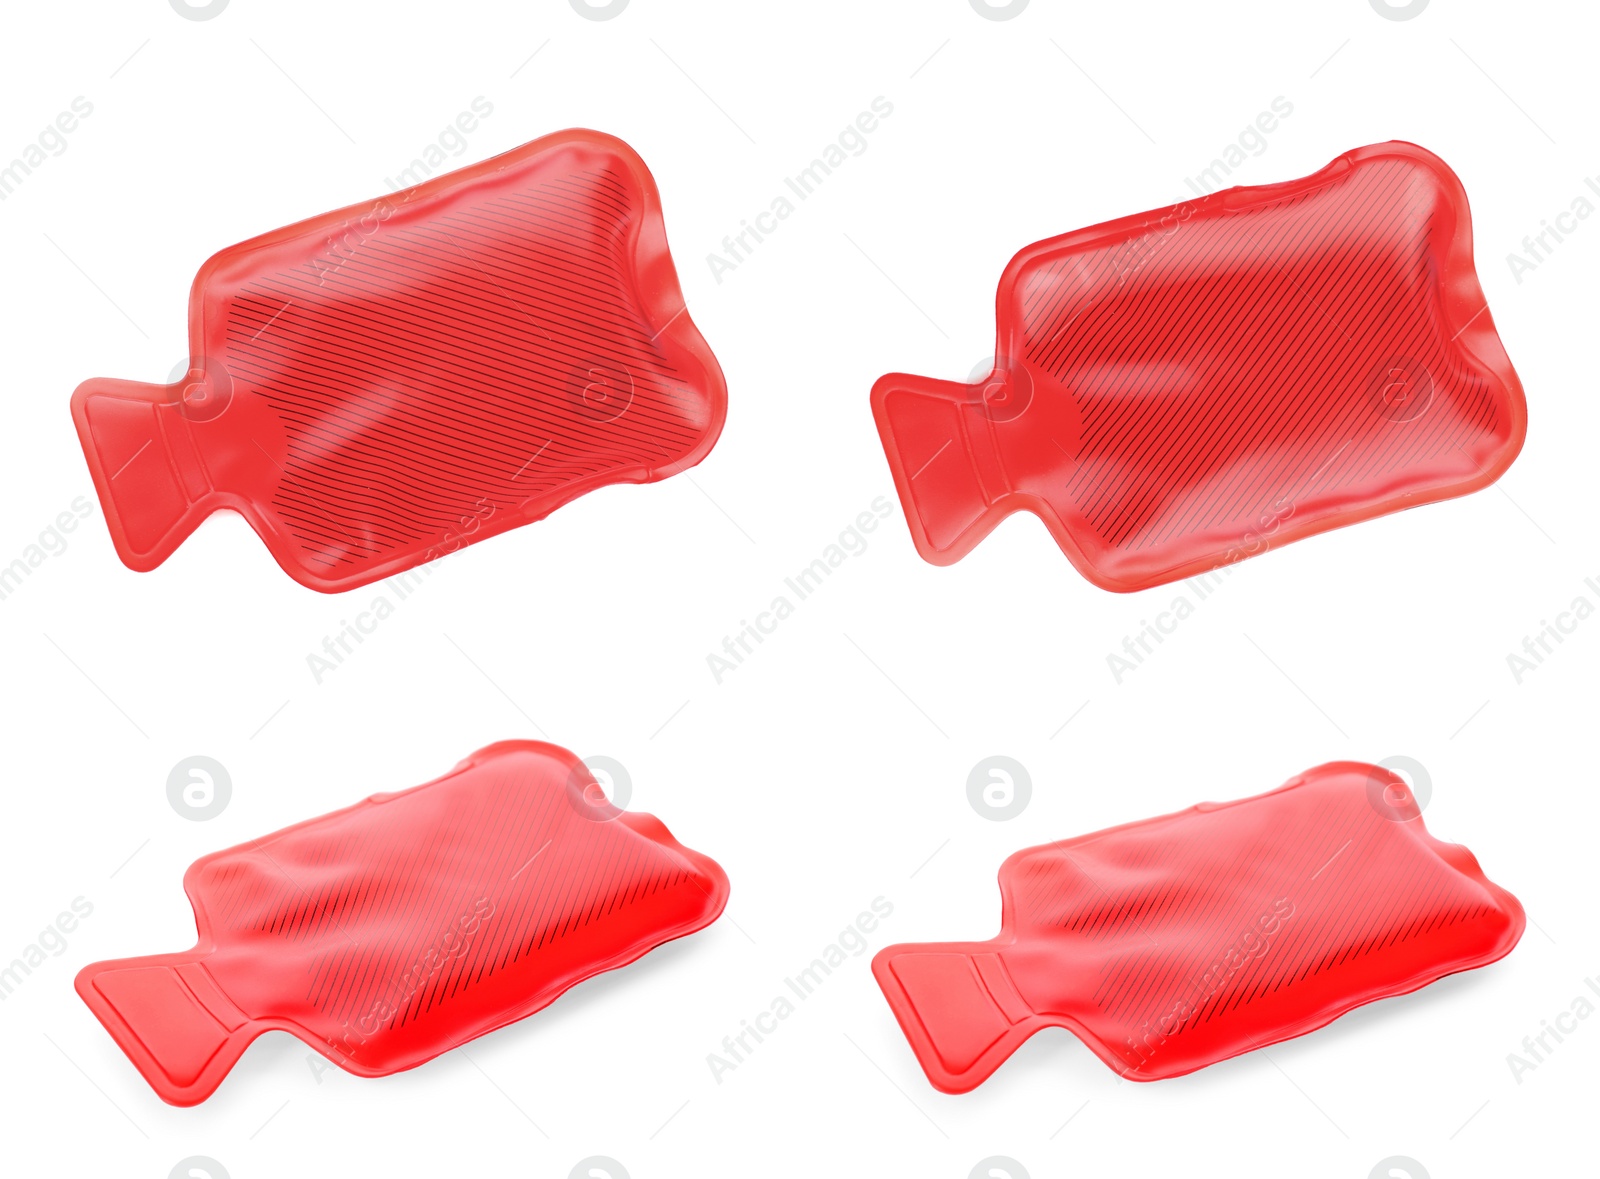 Image of Set with red rubber hot water bottles on white background